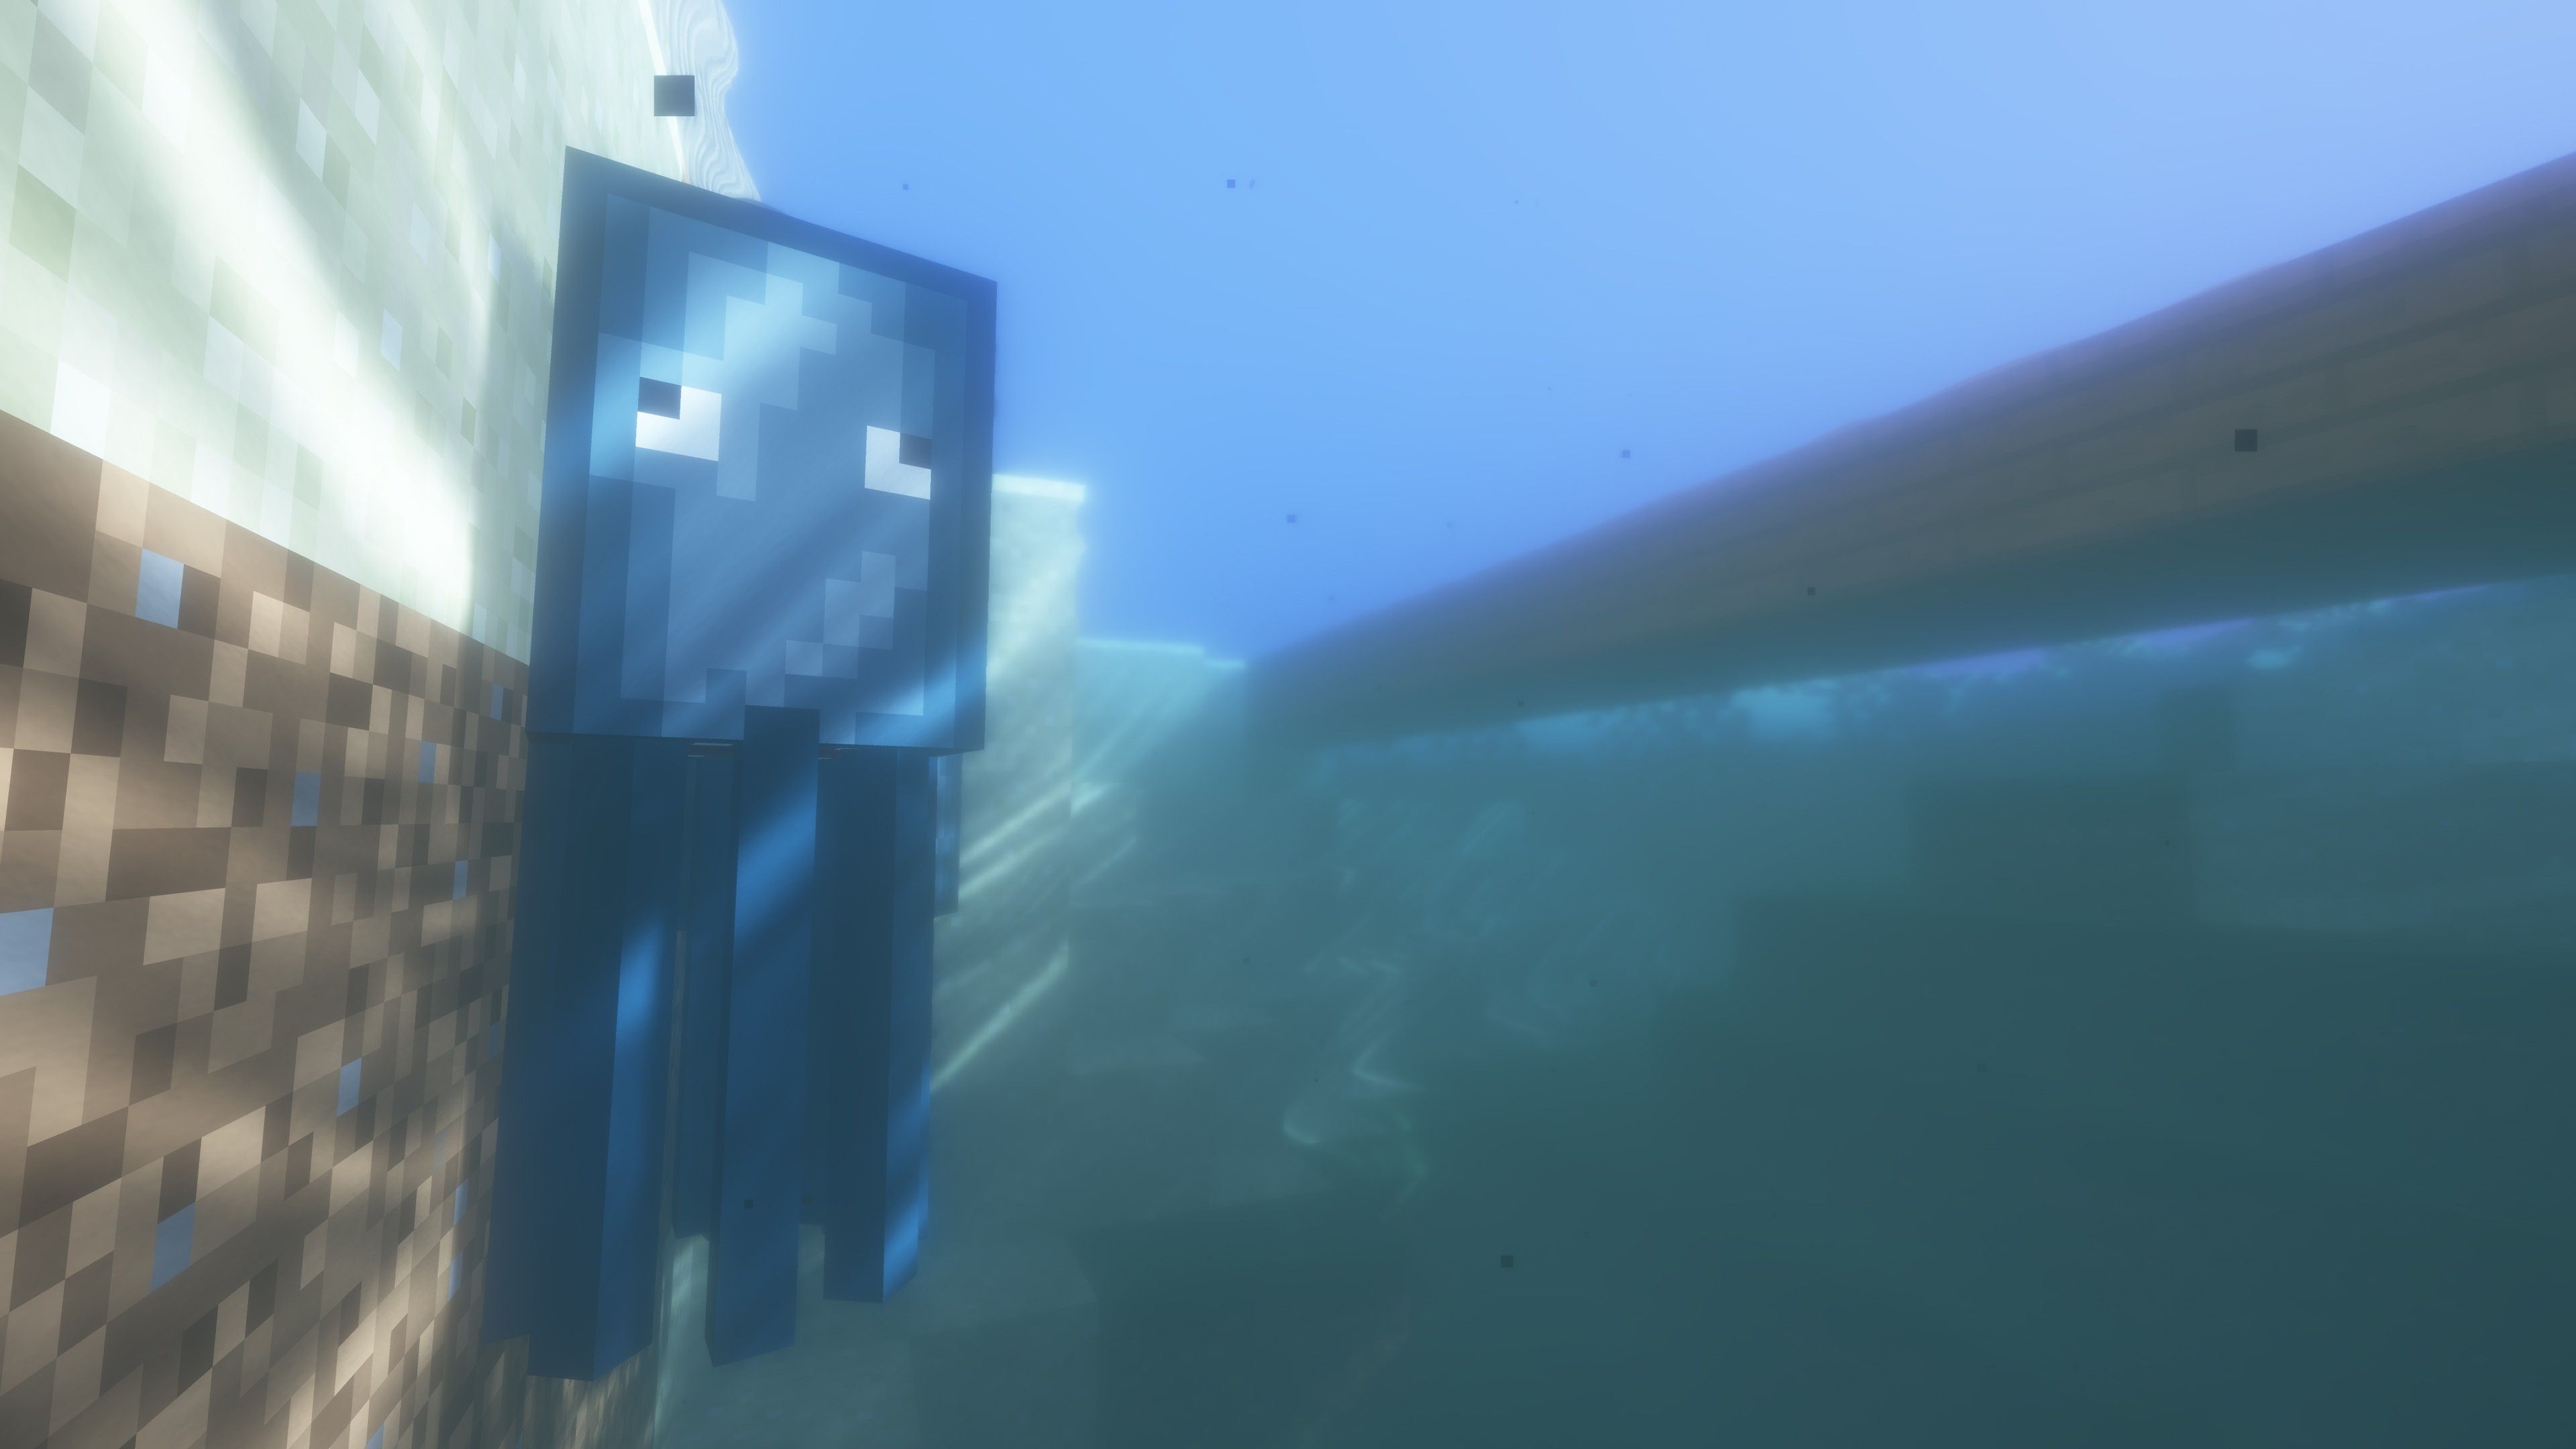 A Minecraft character swimming underwater in a 4K wallpaper. - Minecraft